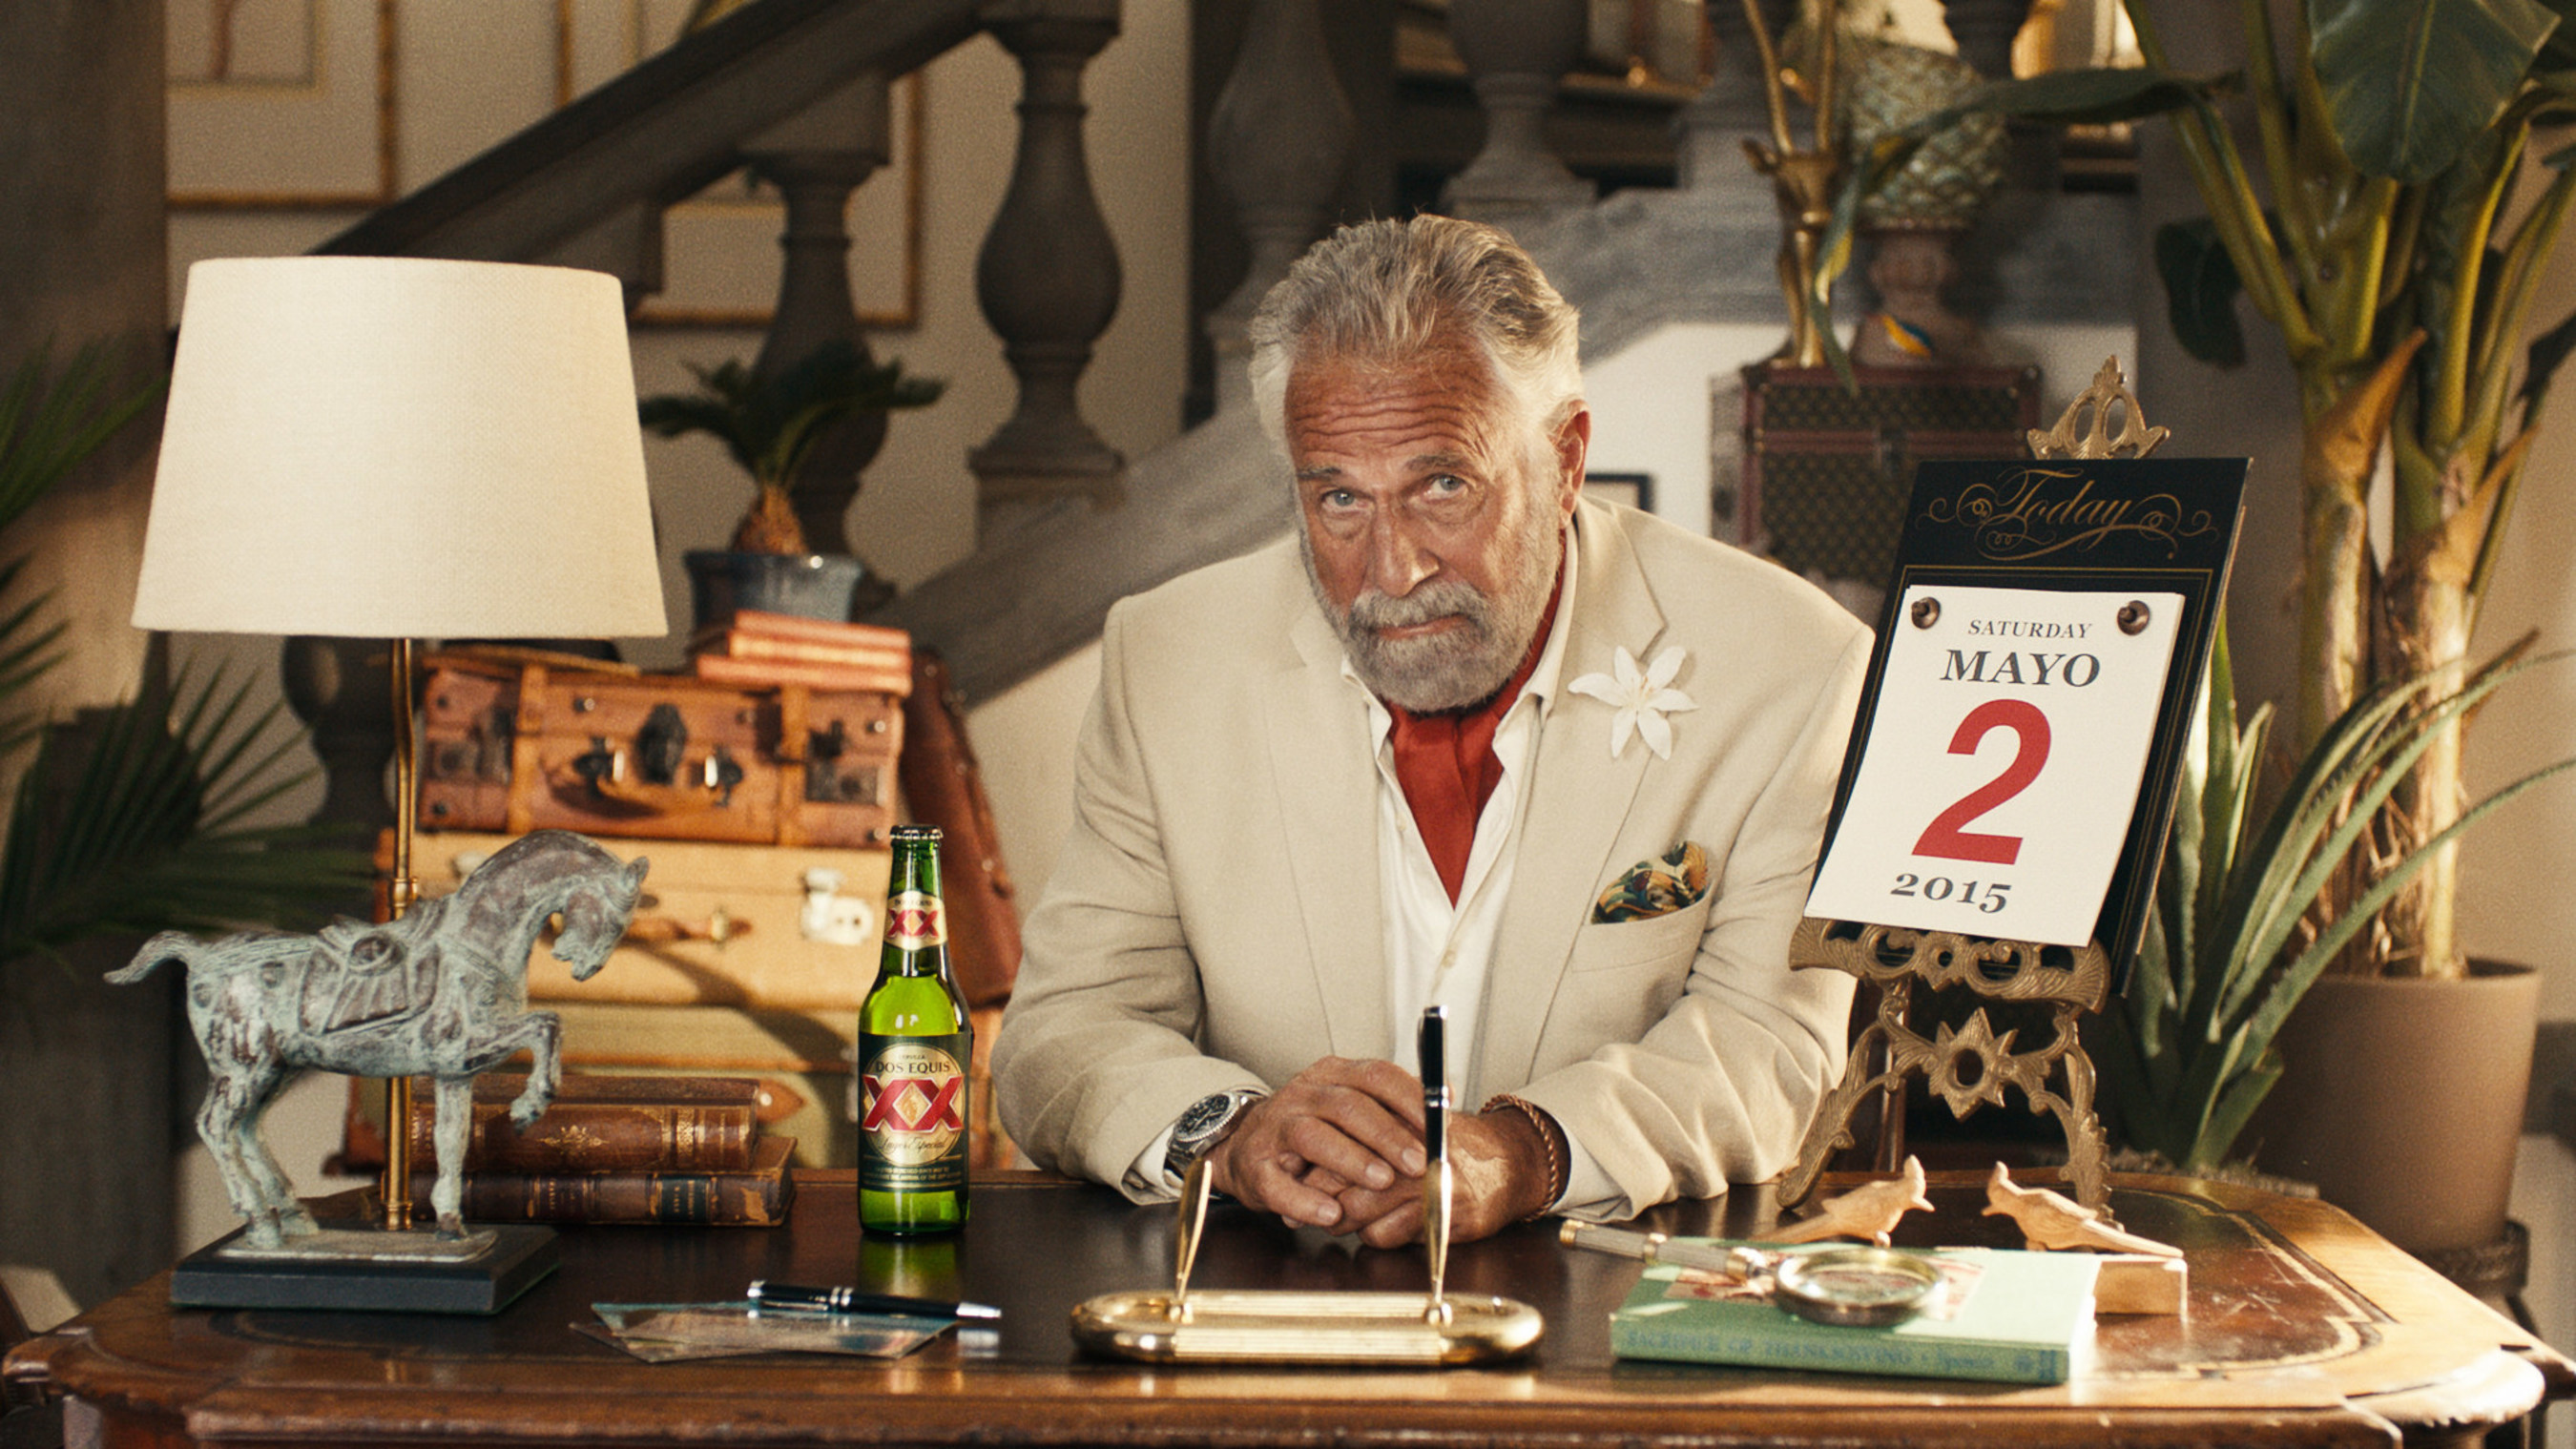 DOS EQUIS SAVES THE CINCO HOLIDAY WITH THE MOST EPIC DOS DE MAYO AND SATURDAY EVER